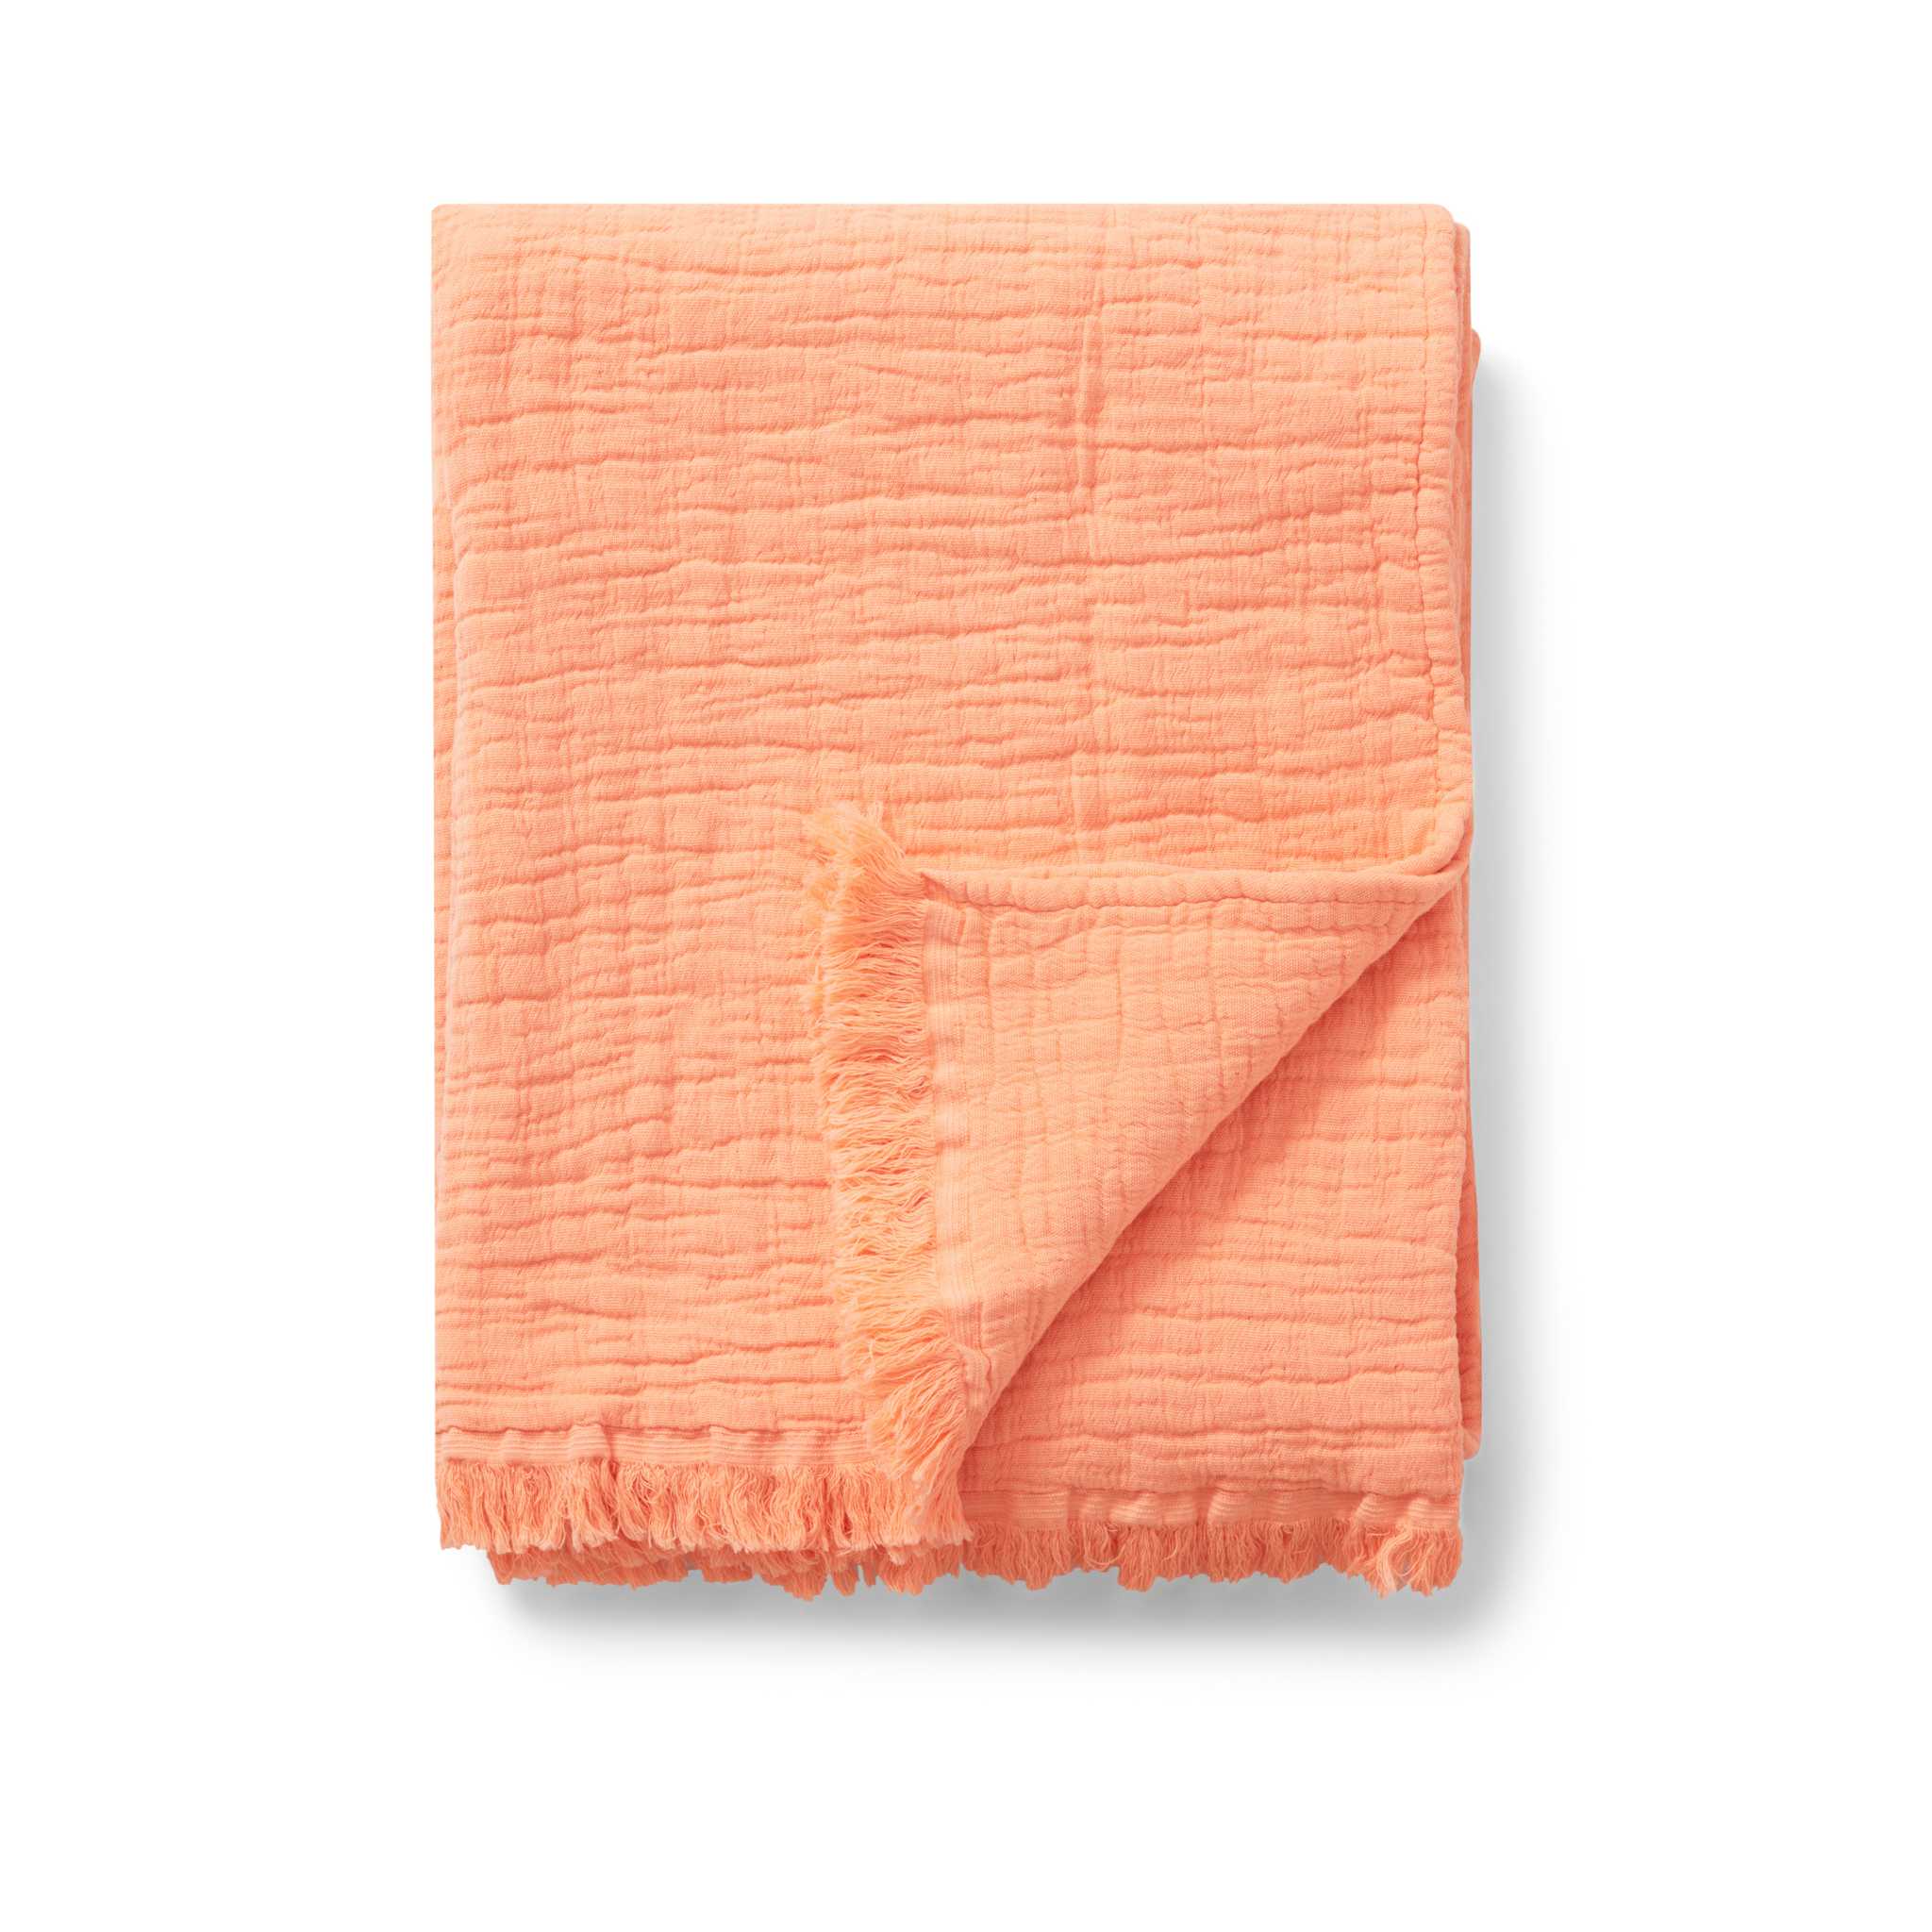 Garbo-And-Friends-Mellow-Cotton-Blanket-Coral-Edge-Folded-Over